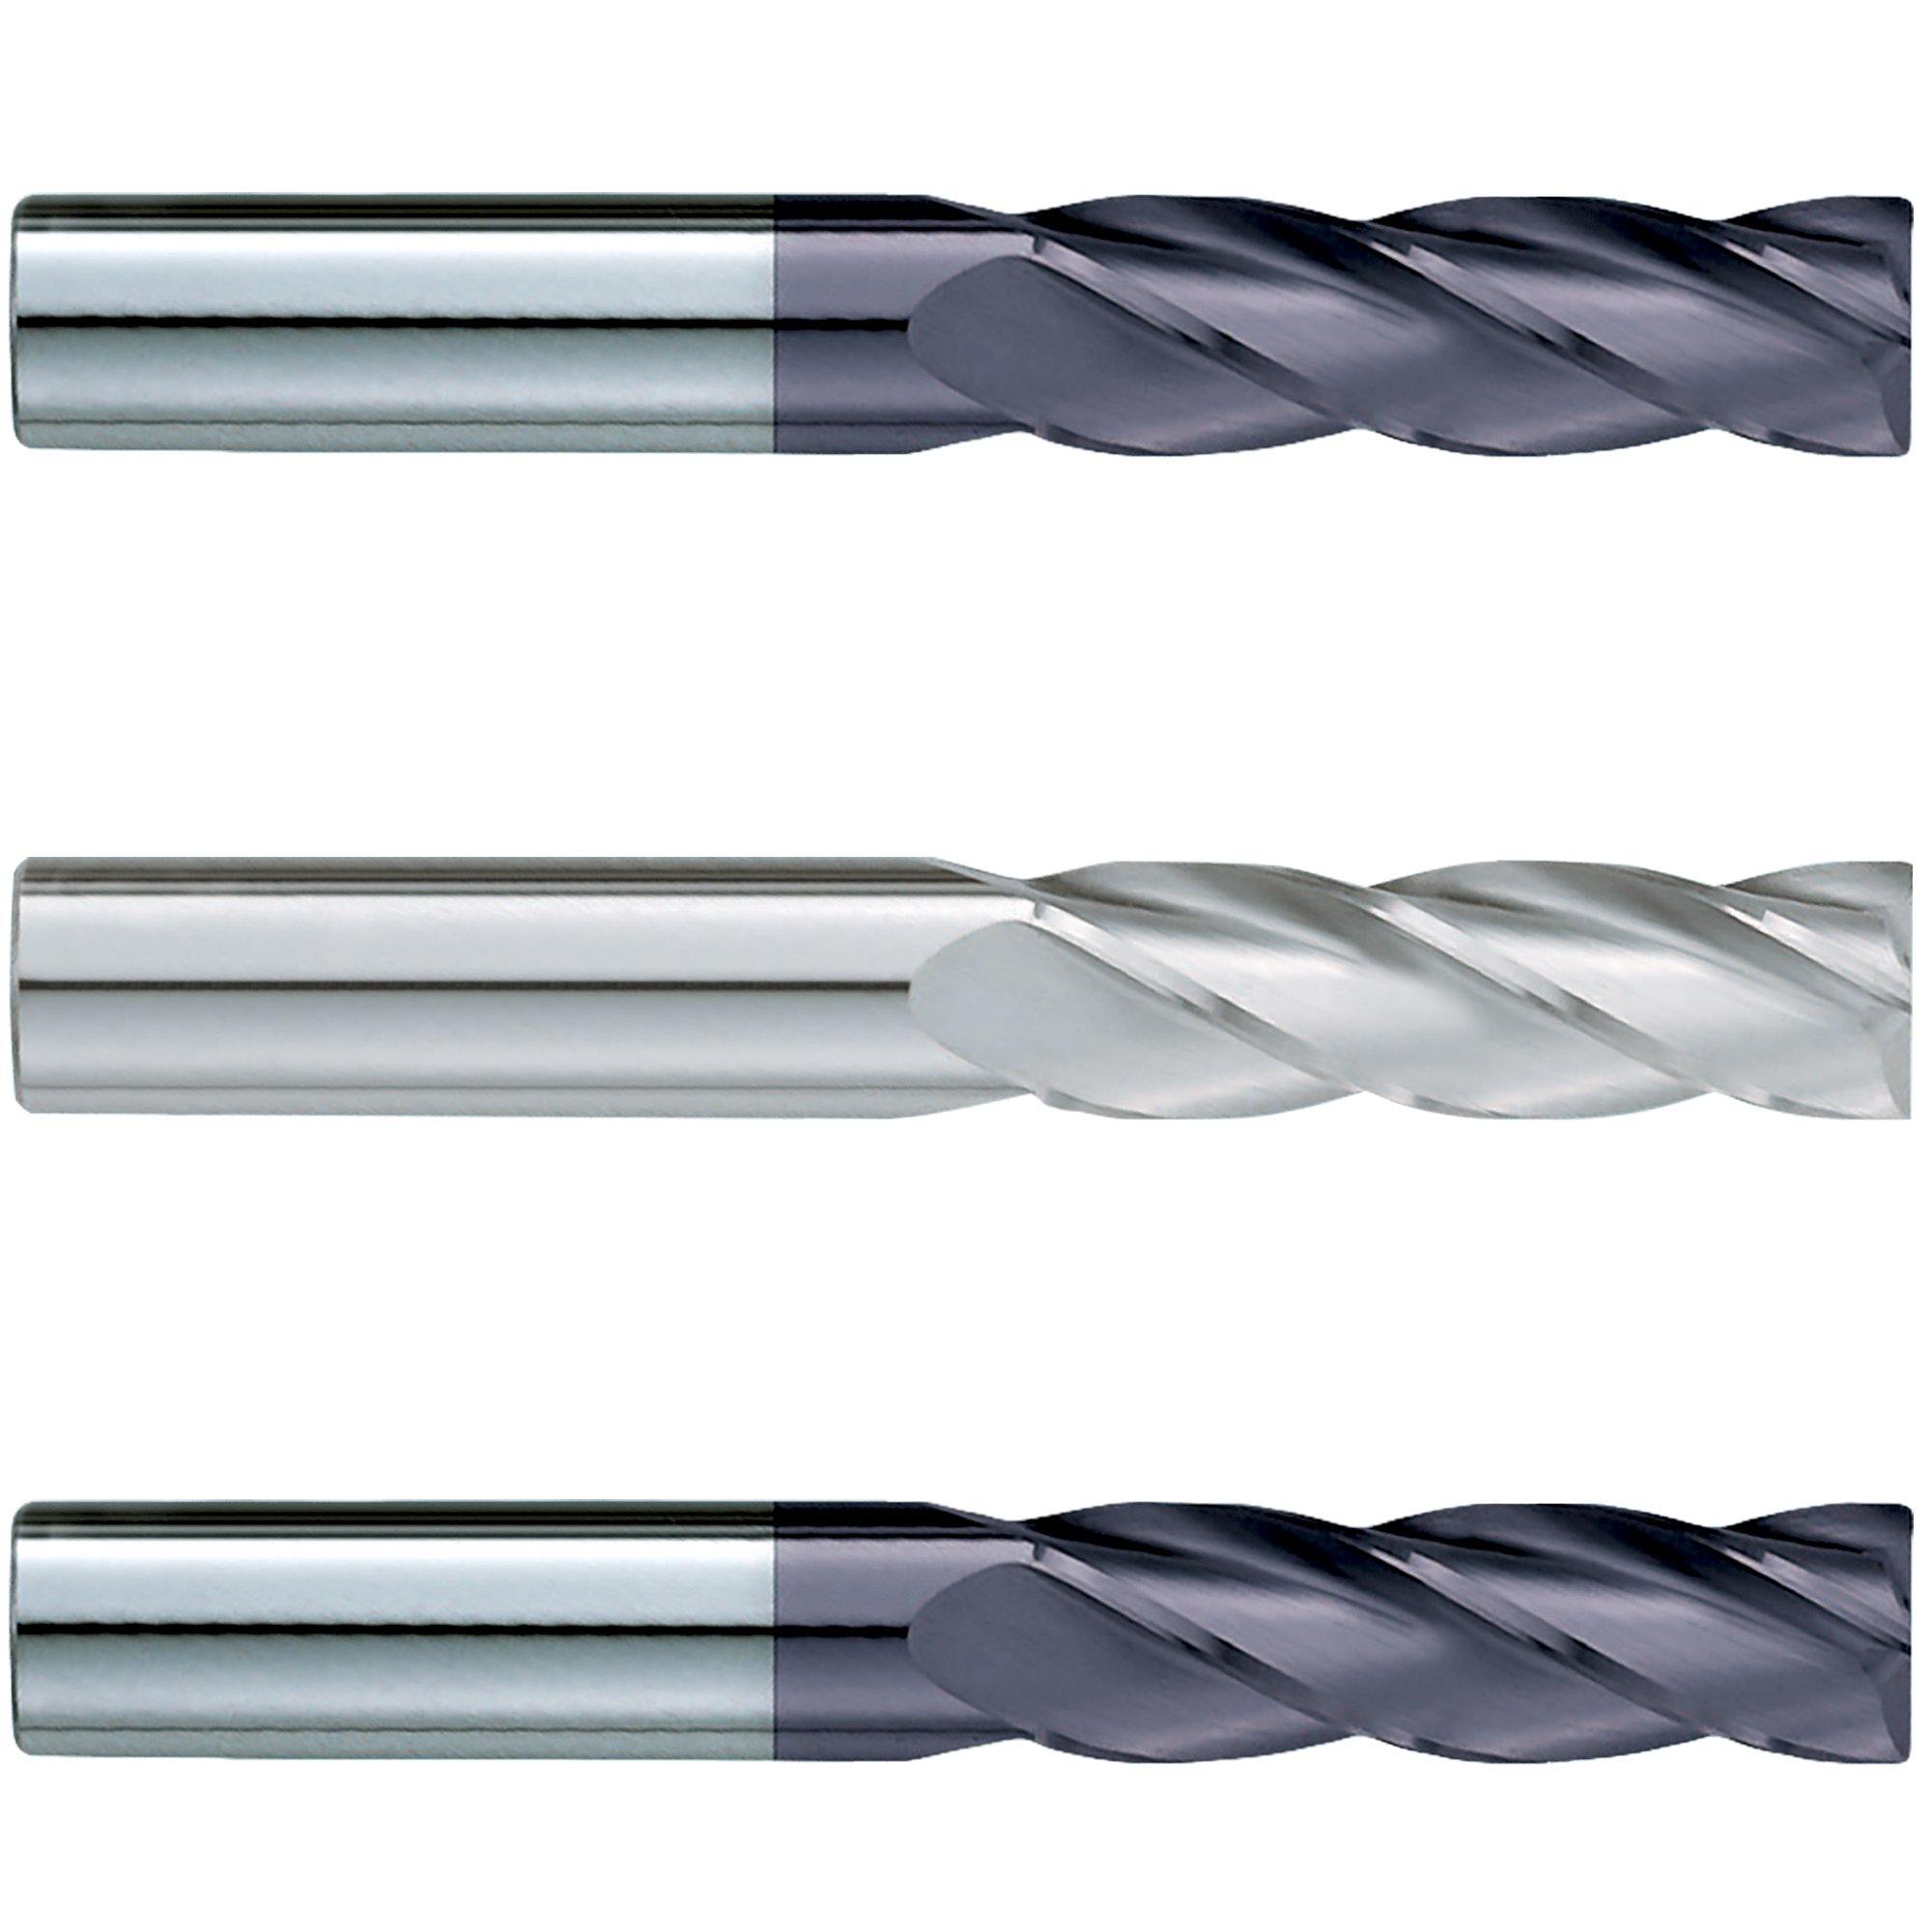 (3 Pack) 1/4" x 3" x 6" Super Long Square Carbide End Mill - The End Mill Store 